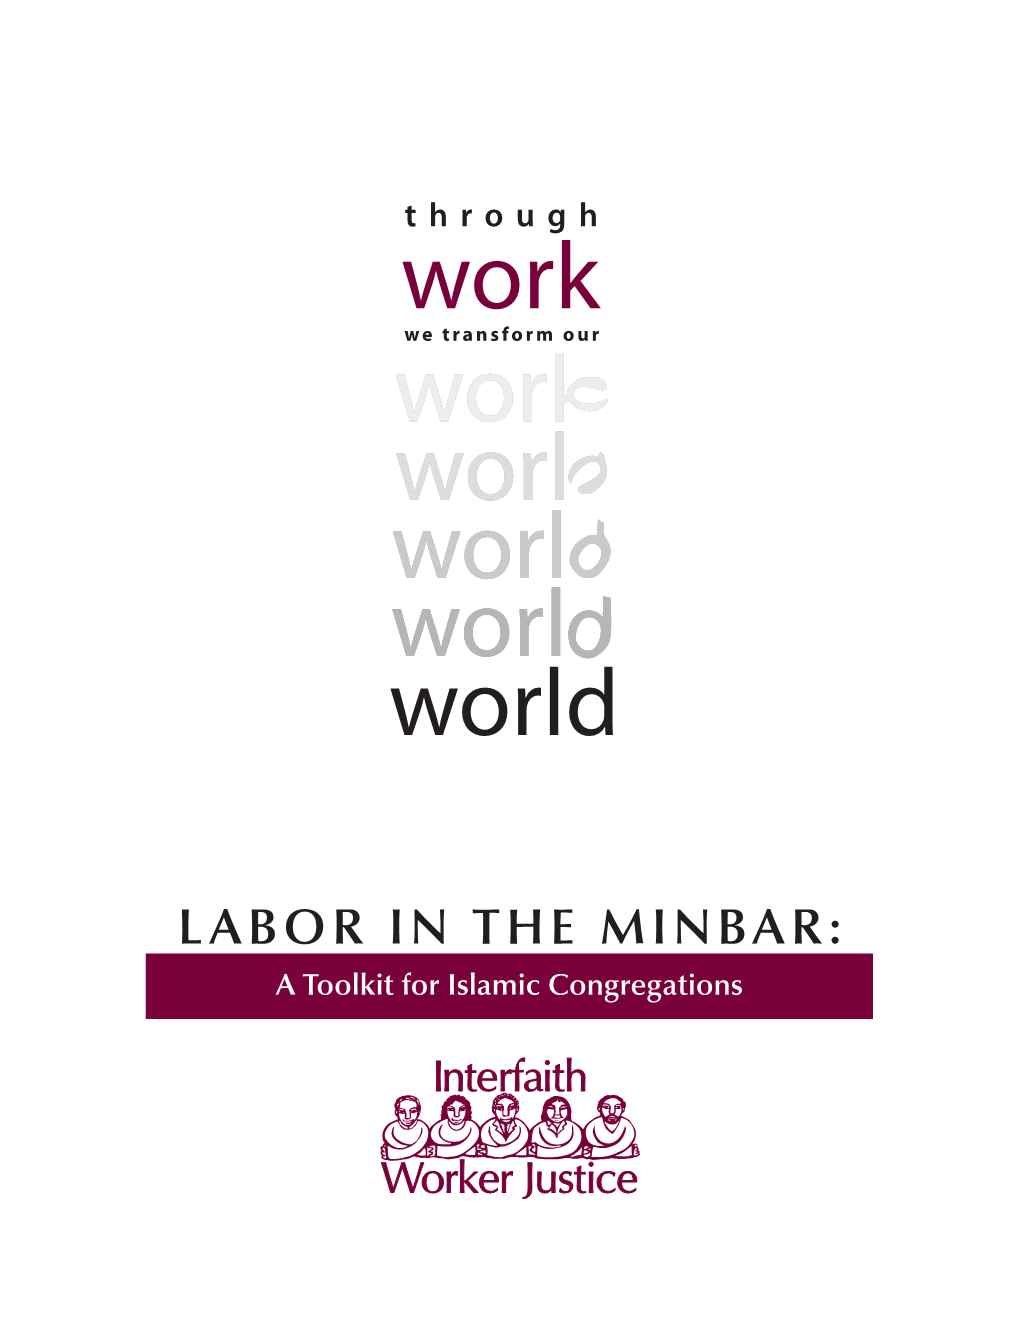 LABOR in the MINBAR: a Toolkit for Islamic Congregations